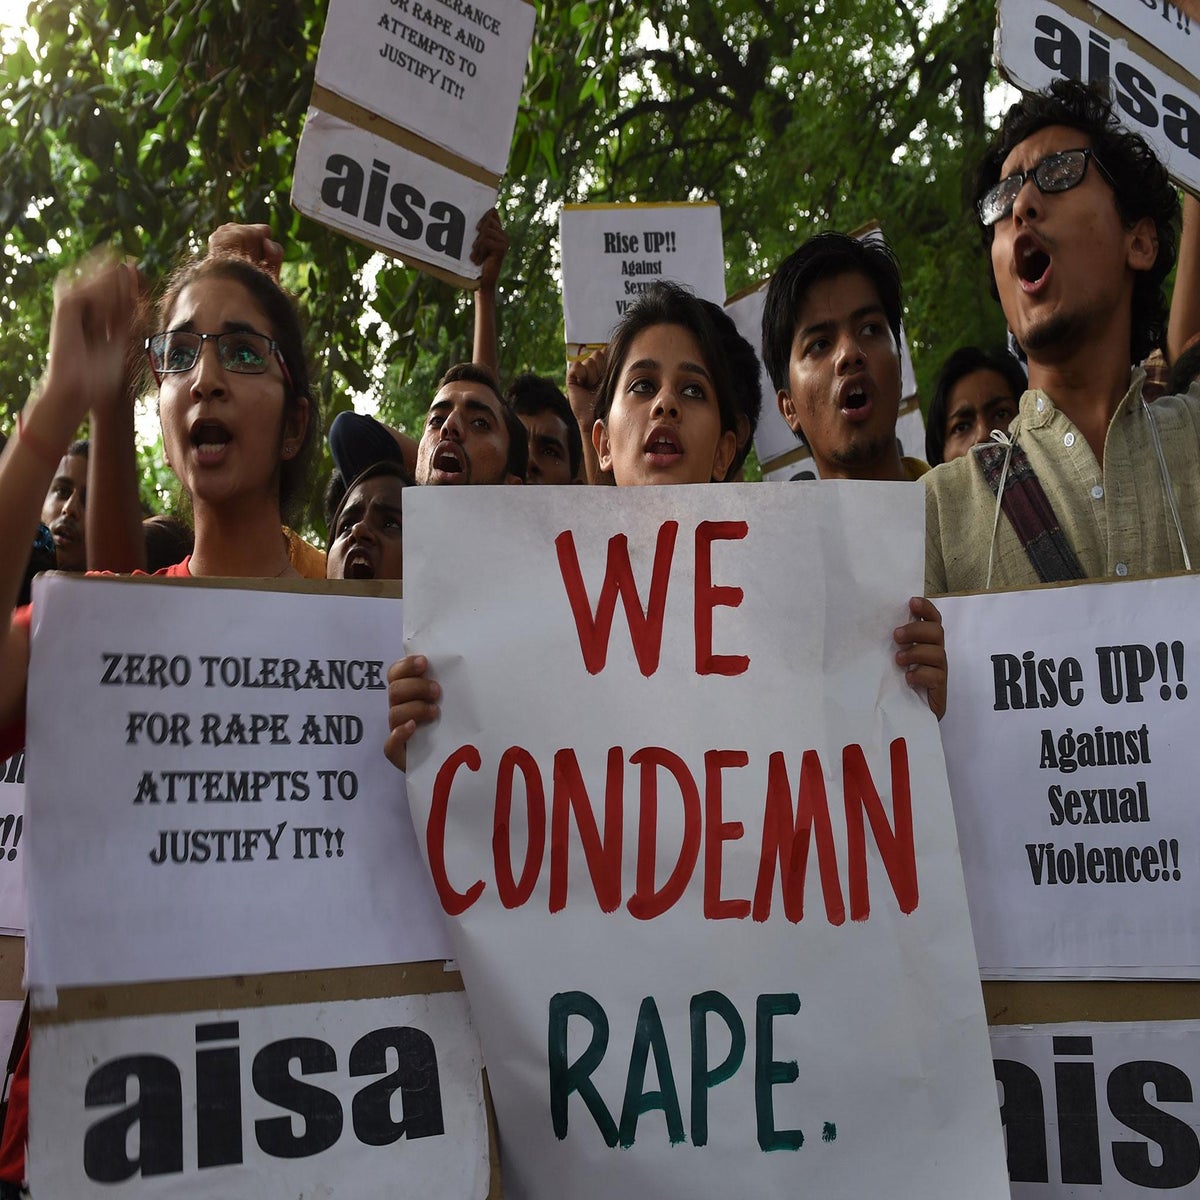 Kannada Repa Sex Video - Gang rape' of student prompts arrests after video causes outcry in India |  The Independent | The Independent